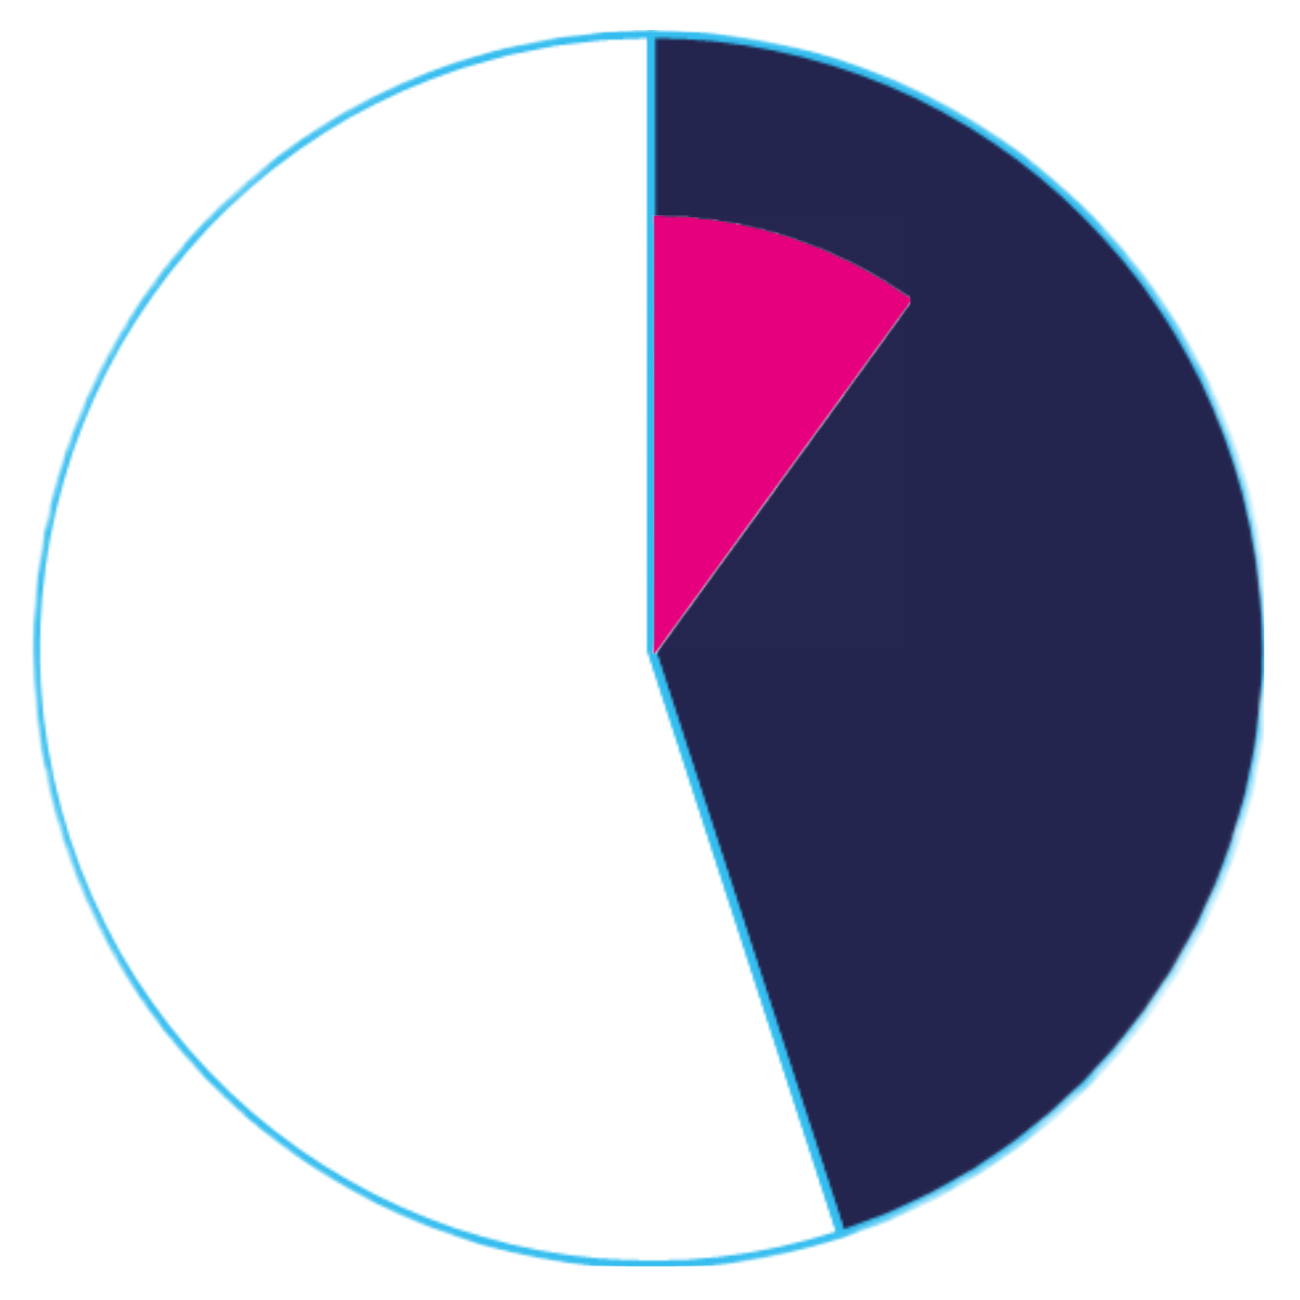 Pie chart showing statistics of customers conducting supervision of audio/video content to meet compliance regulations